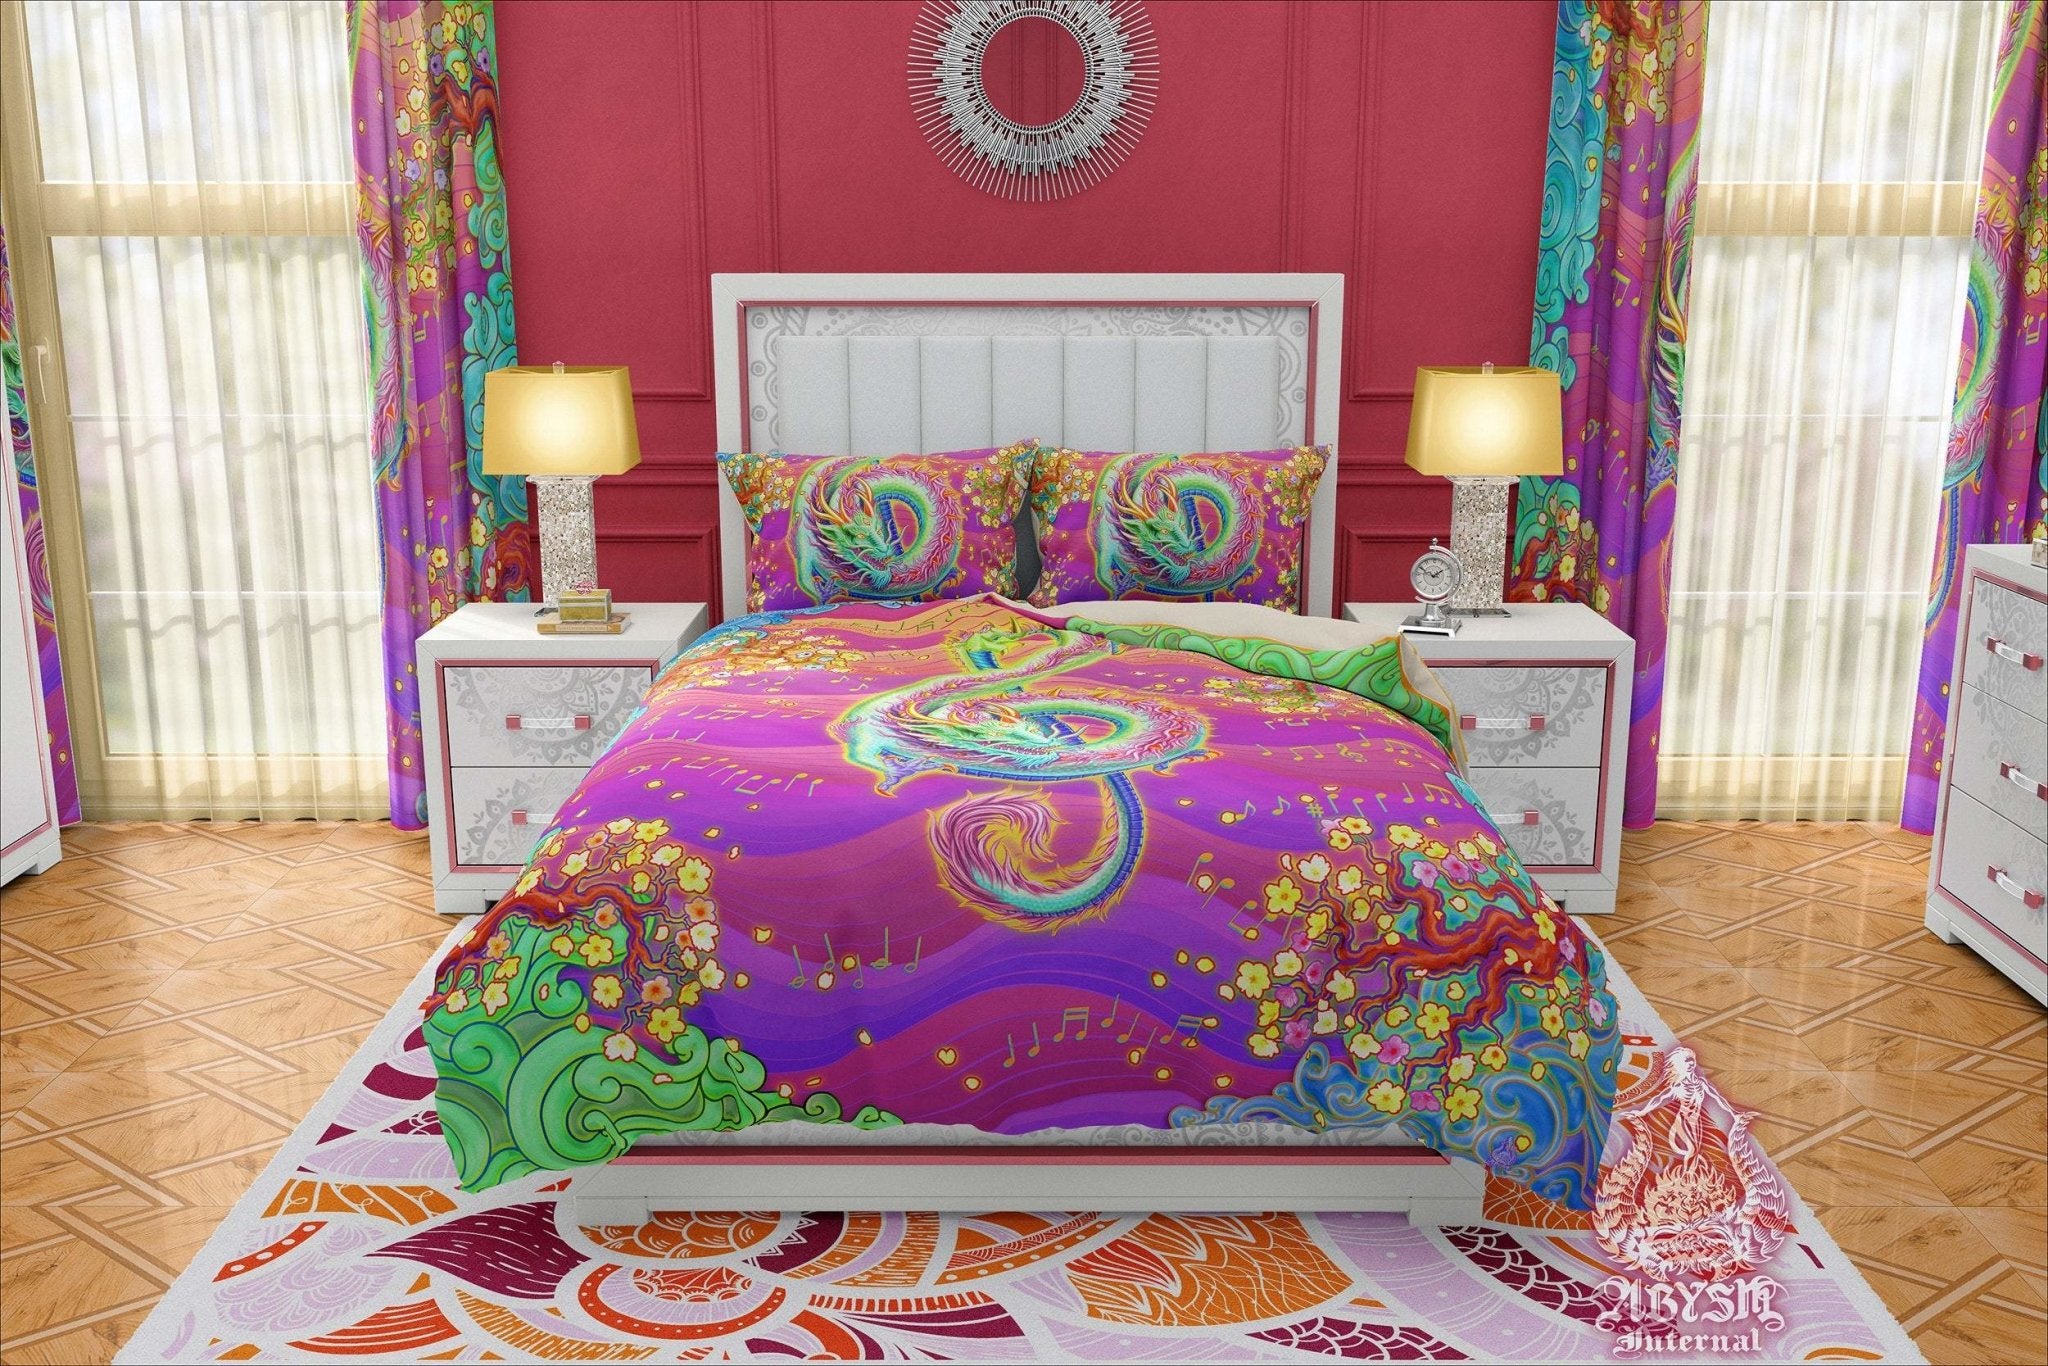 Psychedelic Bedding Set, Comforter and Duvet, Indie Bed Cover and Bedroom Decor, King, Queen and Twin Size - Neon Dragon, Kidcore - Abysm Internal